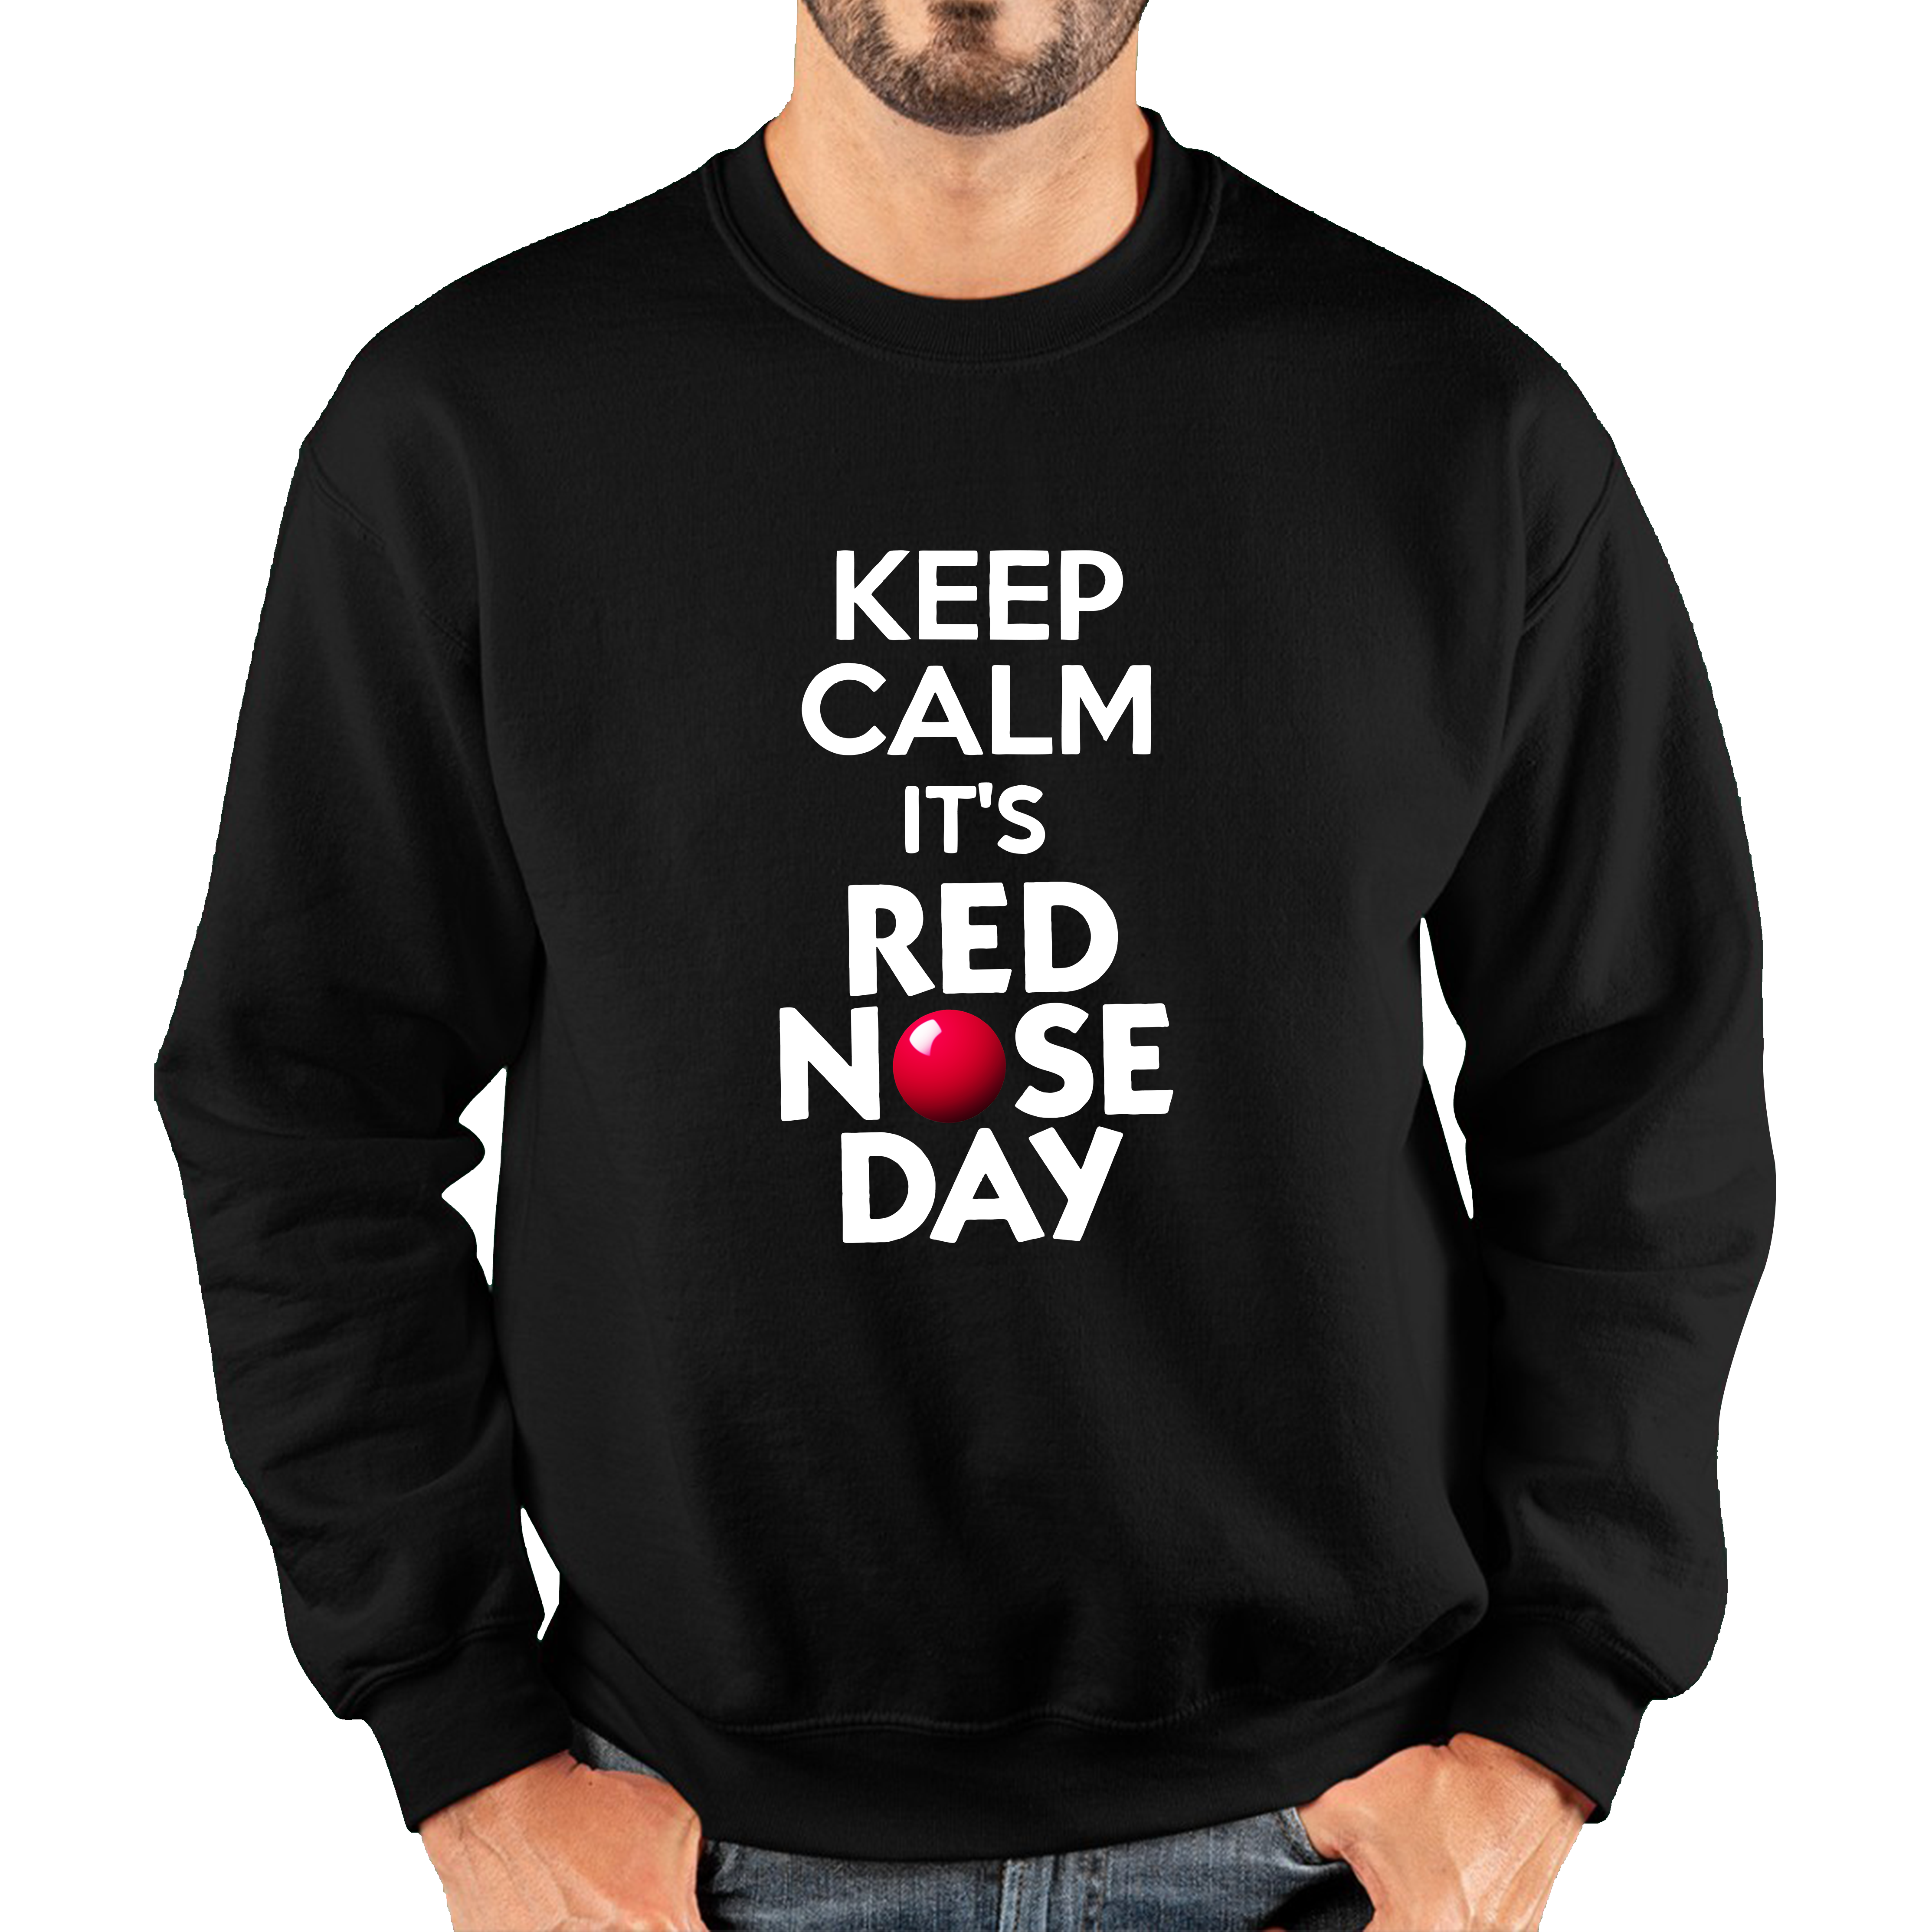 Keep Calm Its Red Nose Day Adult Sweatshirt. 50% Goes To Charity